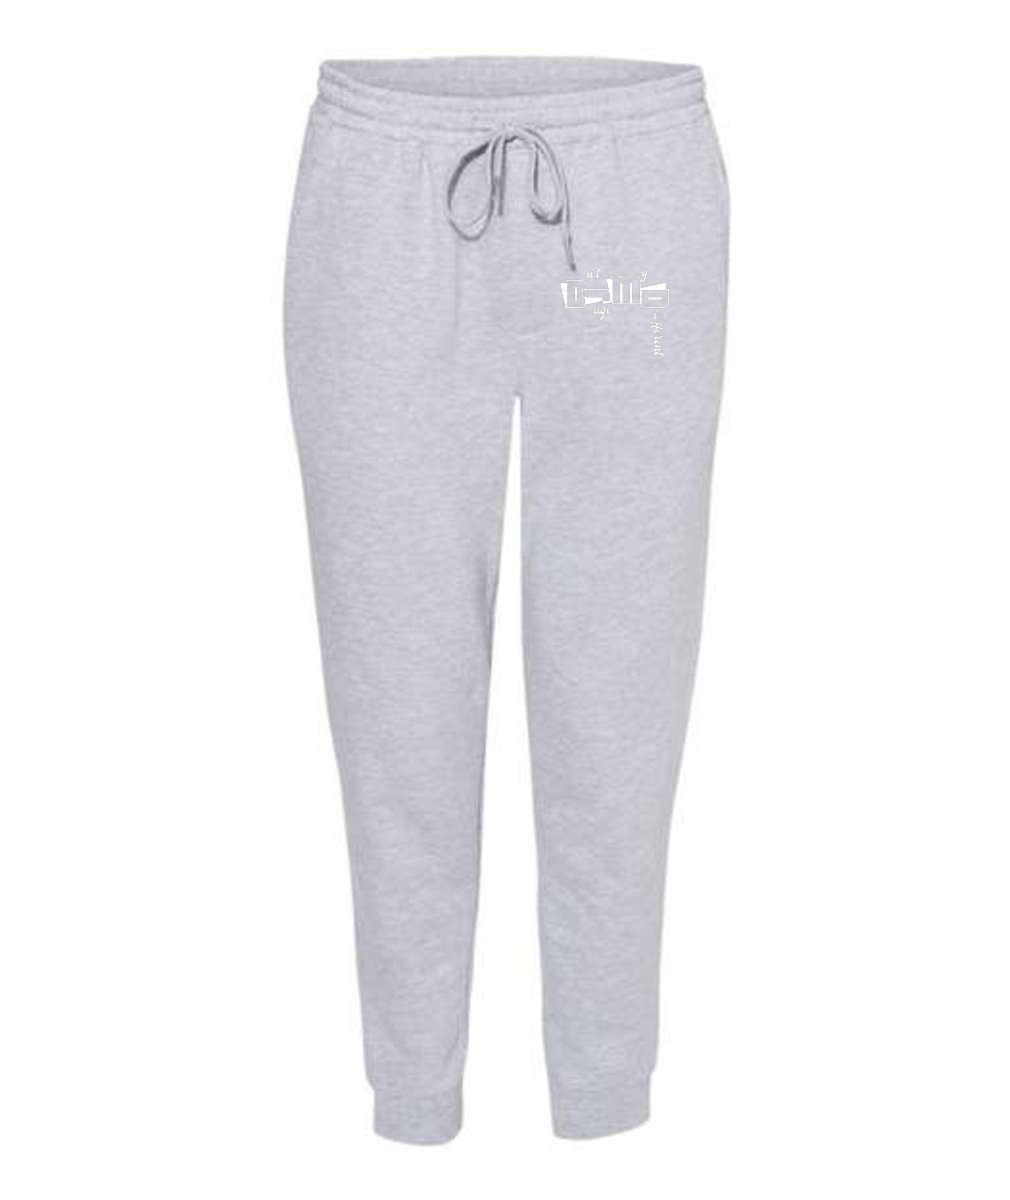 Dnt Juge My Different Embroidered Independent Trading Co. - Midweight Fleece Joggers or Similar